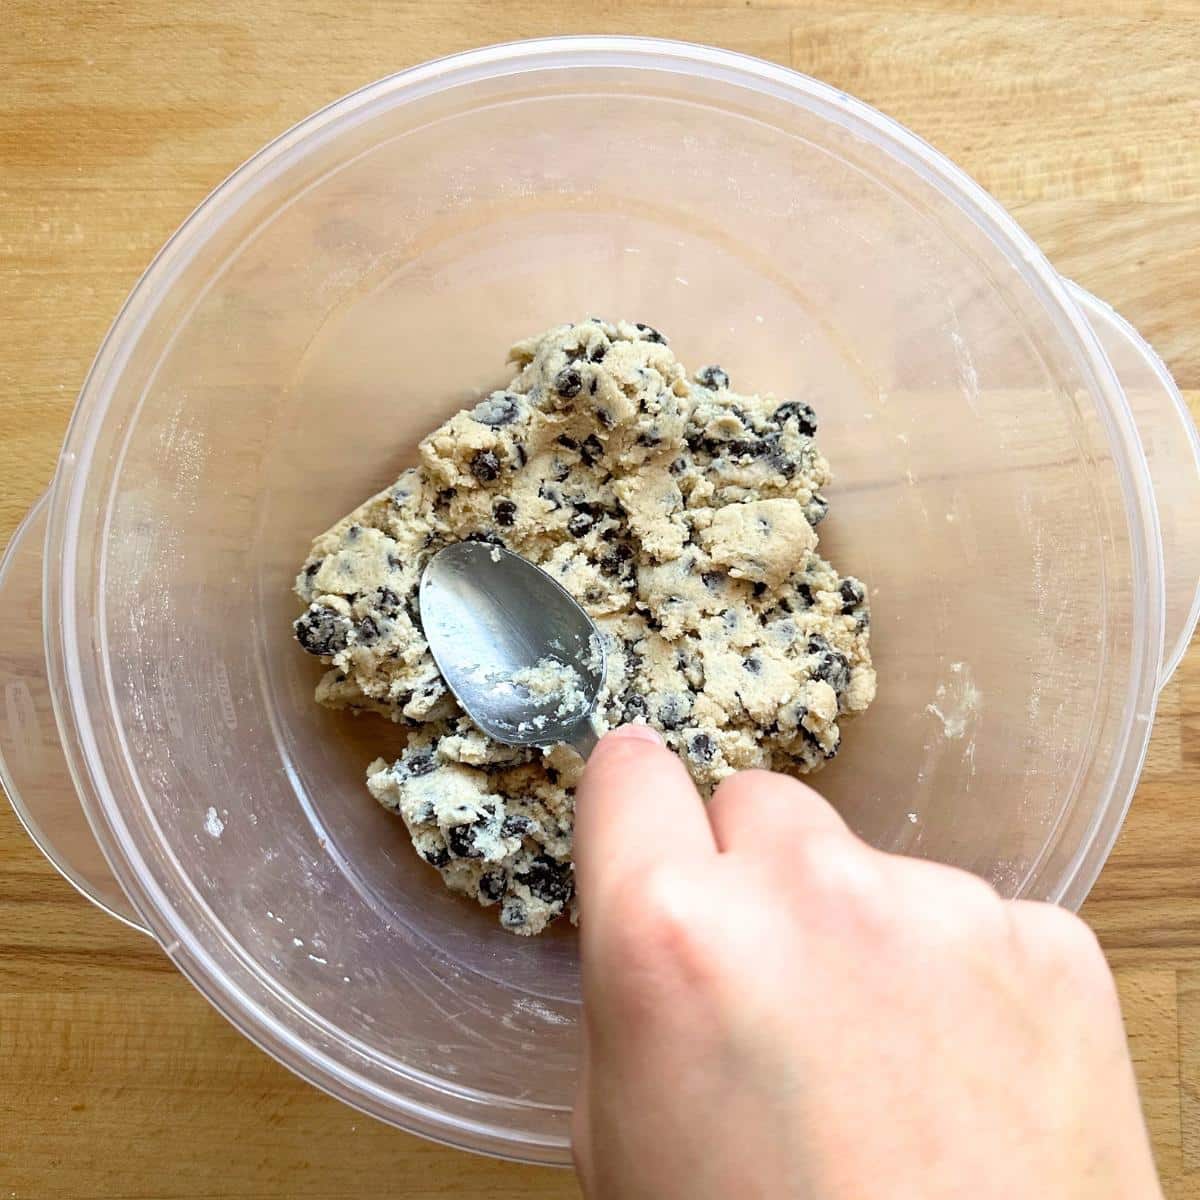 Mixing the entire dough with chocolate chips.